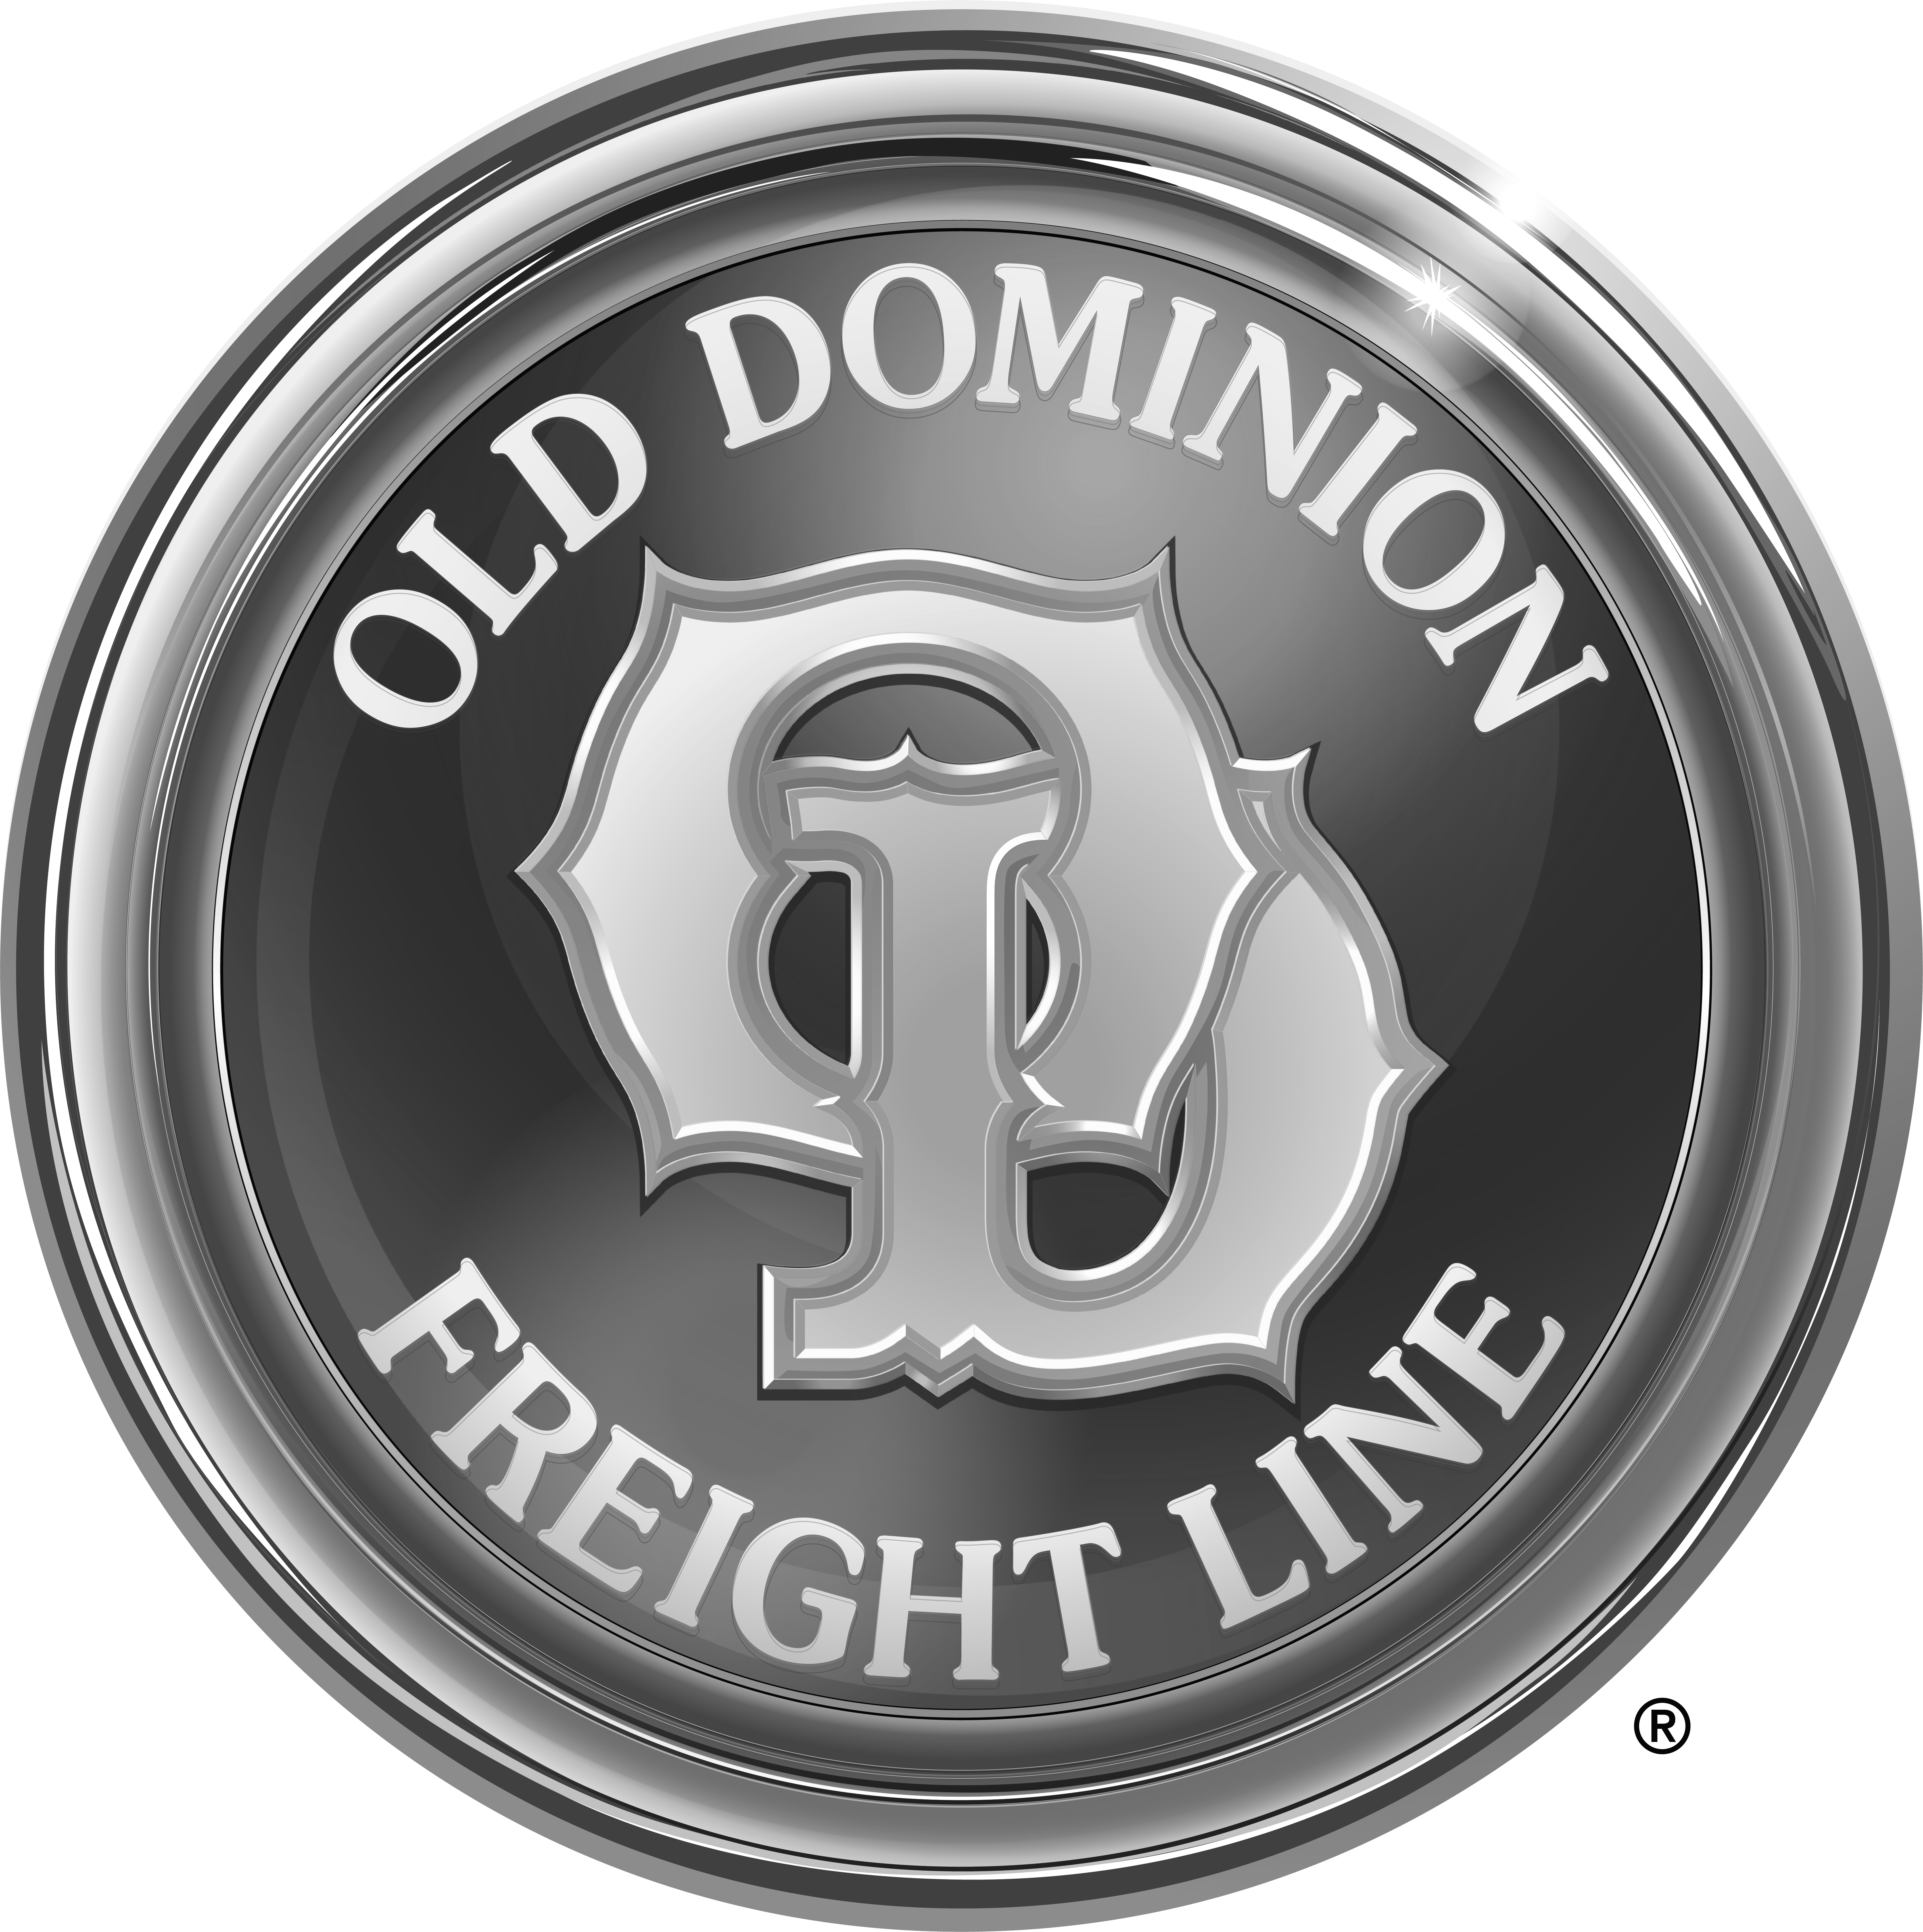 Old Dominion Freight Line logo